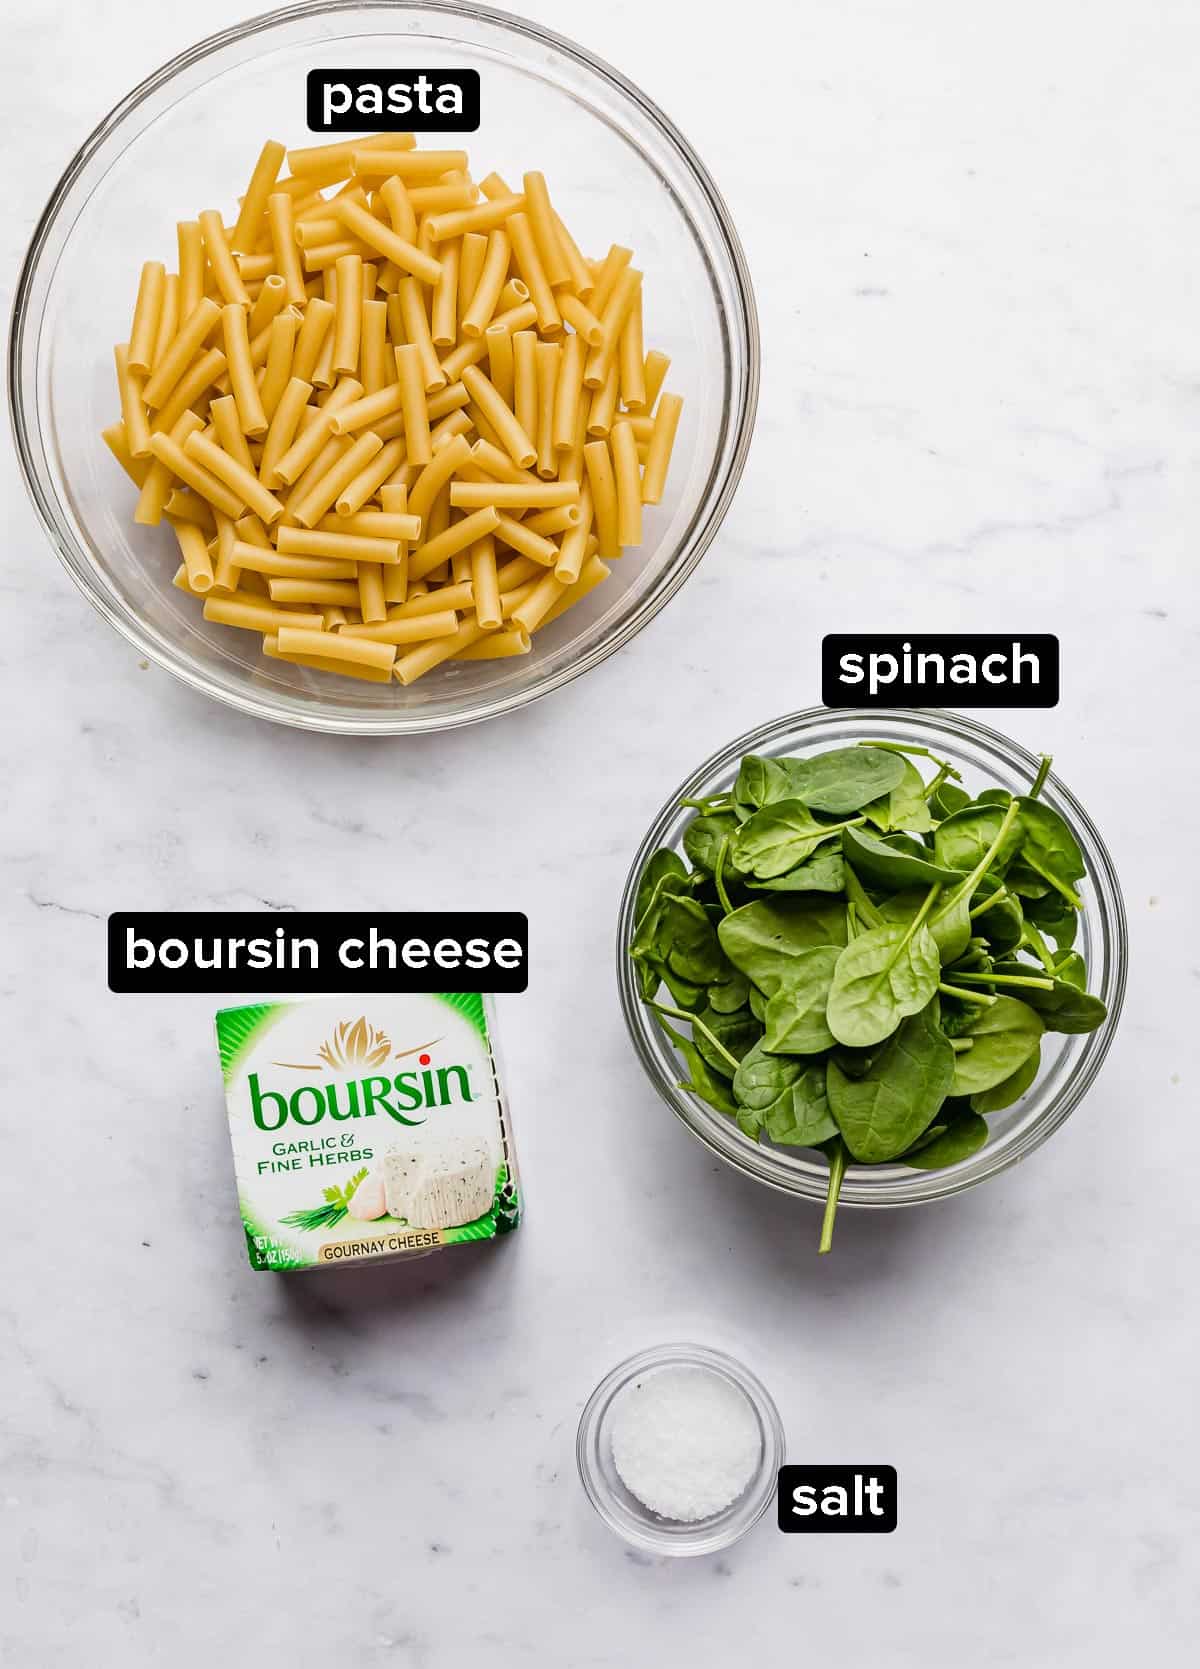 Boursin Pasta recipe ingredients on a white marble background: spinach, pasta, boursin cheese, salt.